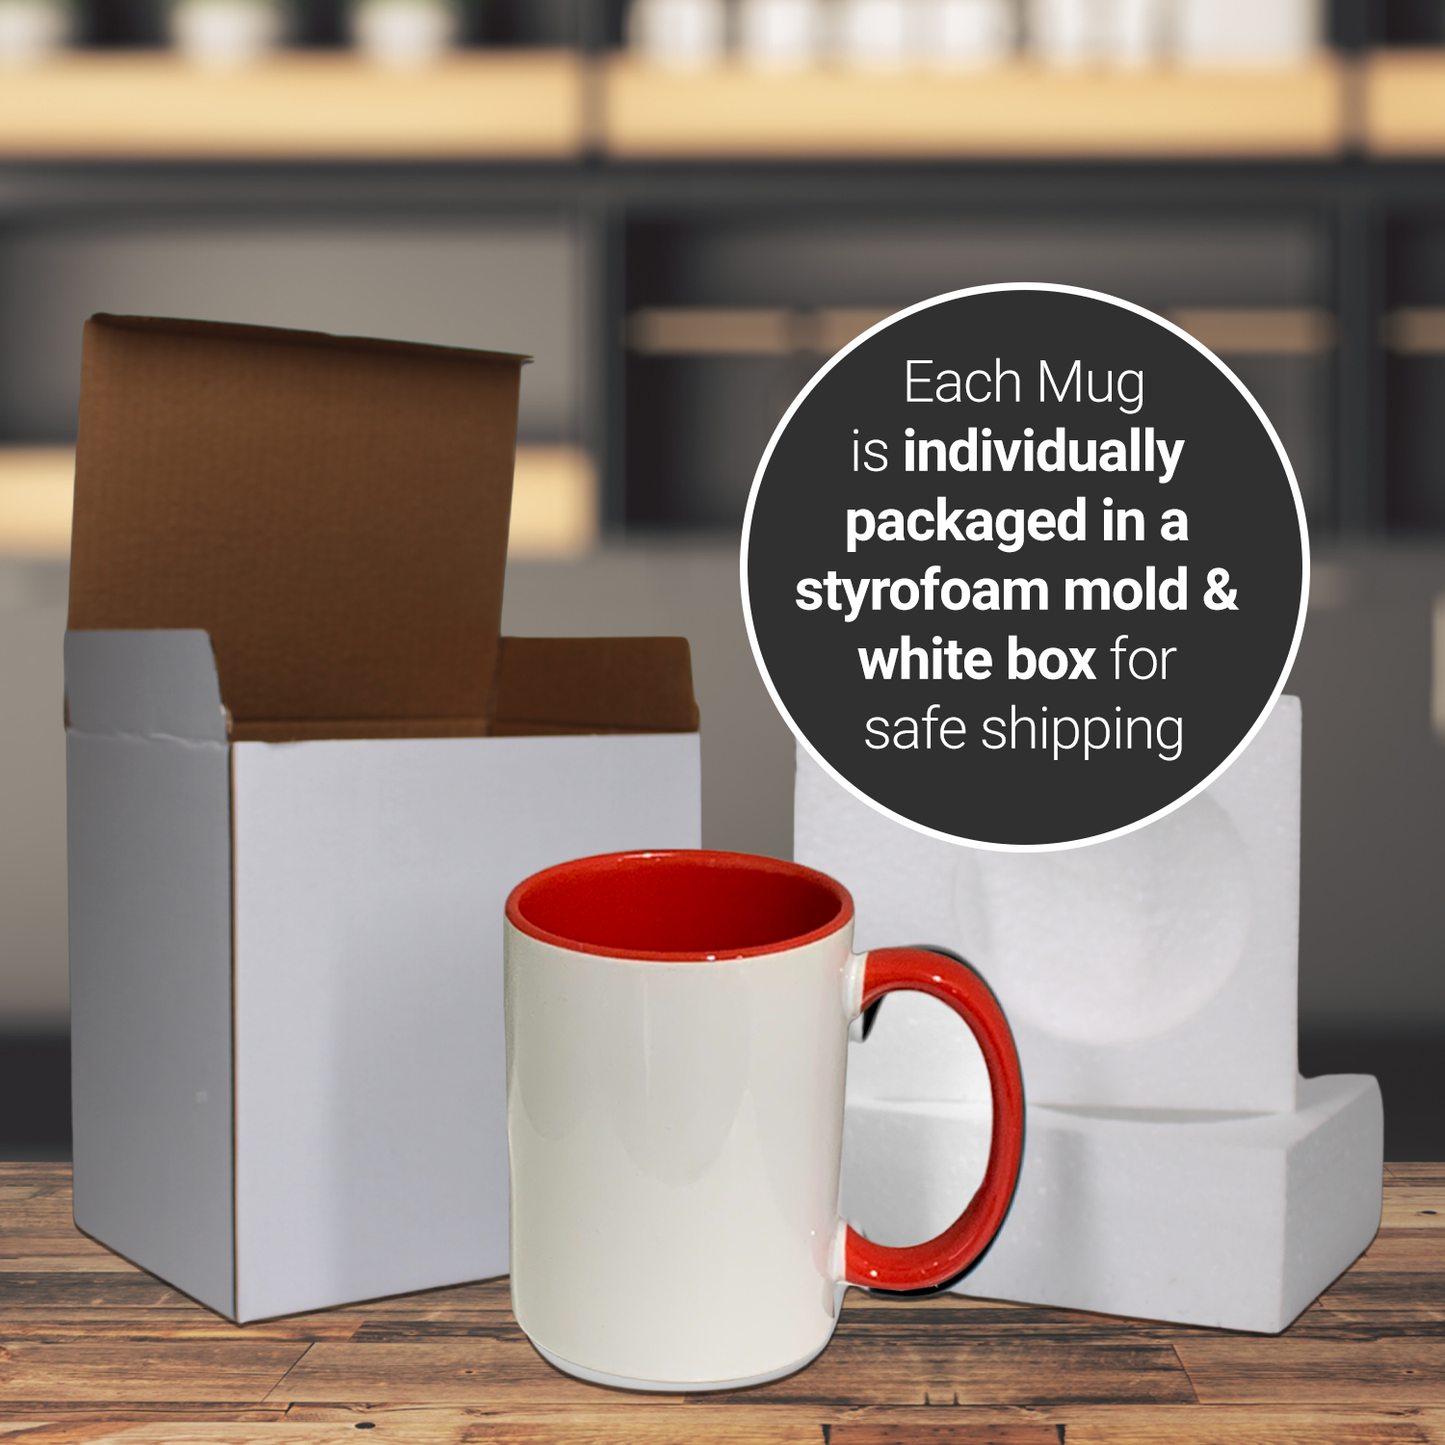 6 PACK -11 once White sublimation mugs MULTI 6 COLORS inner color   and handle with reinforced foam box packaging